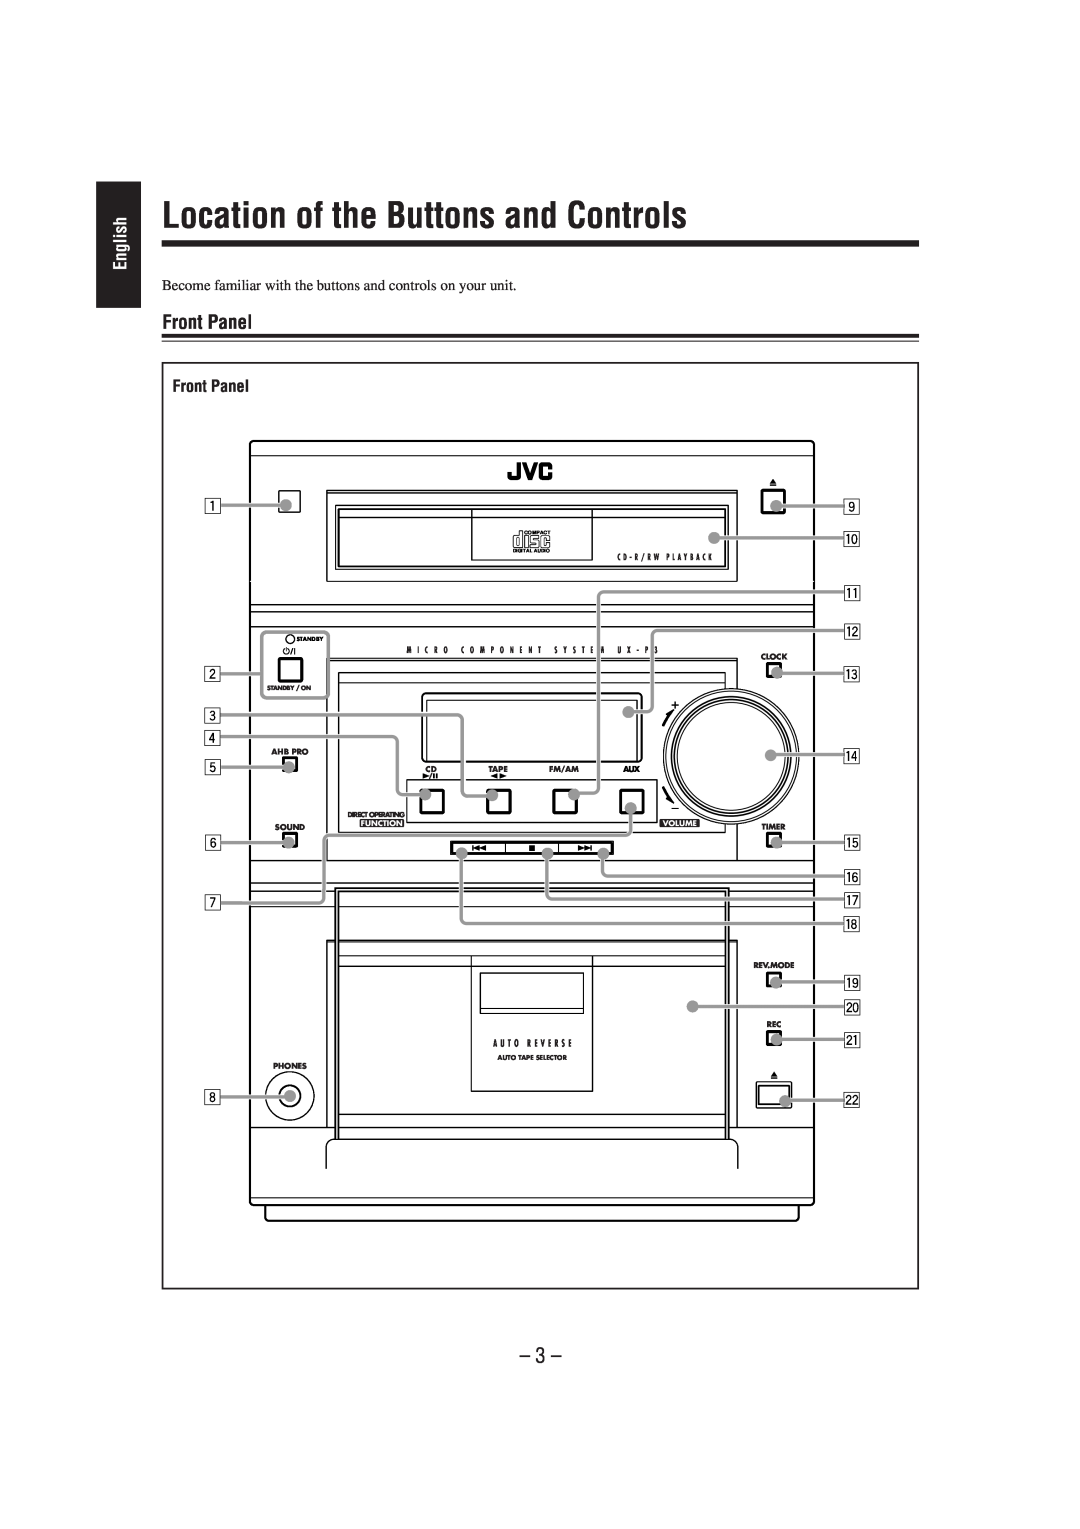 JVC UX-P3 manual Location of the Buttons and Controls, Front Panel, English 